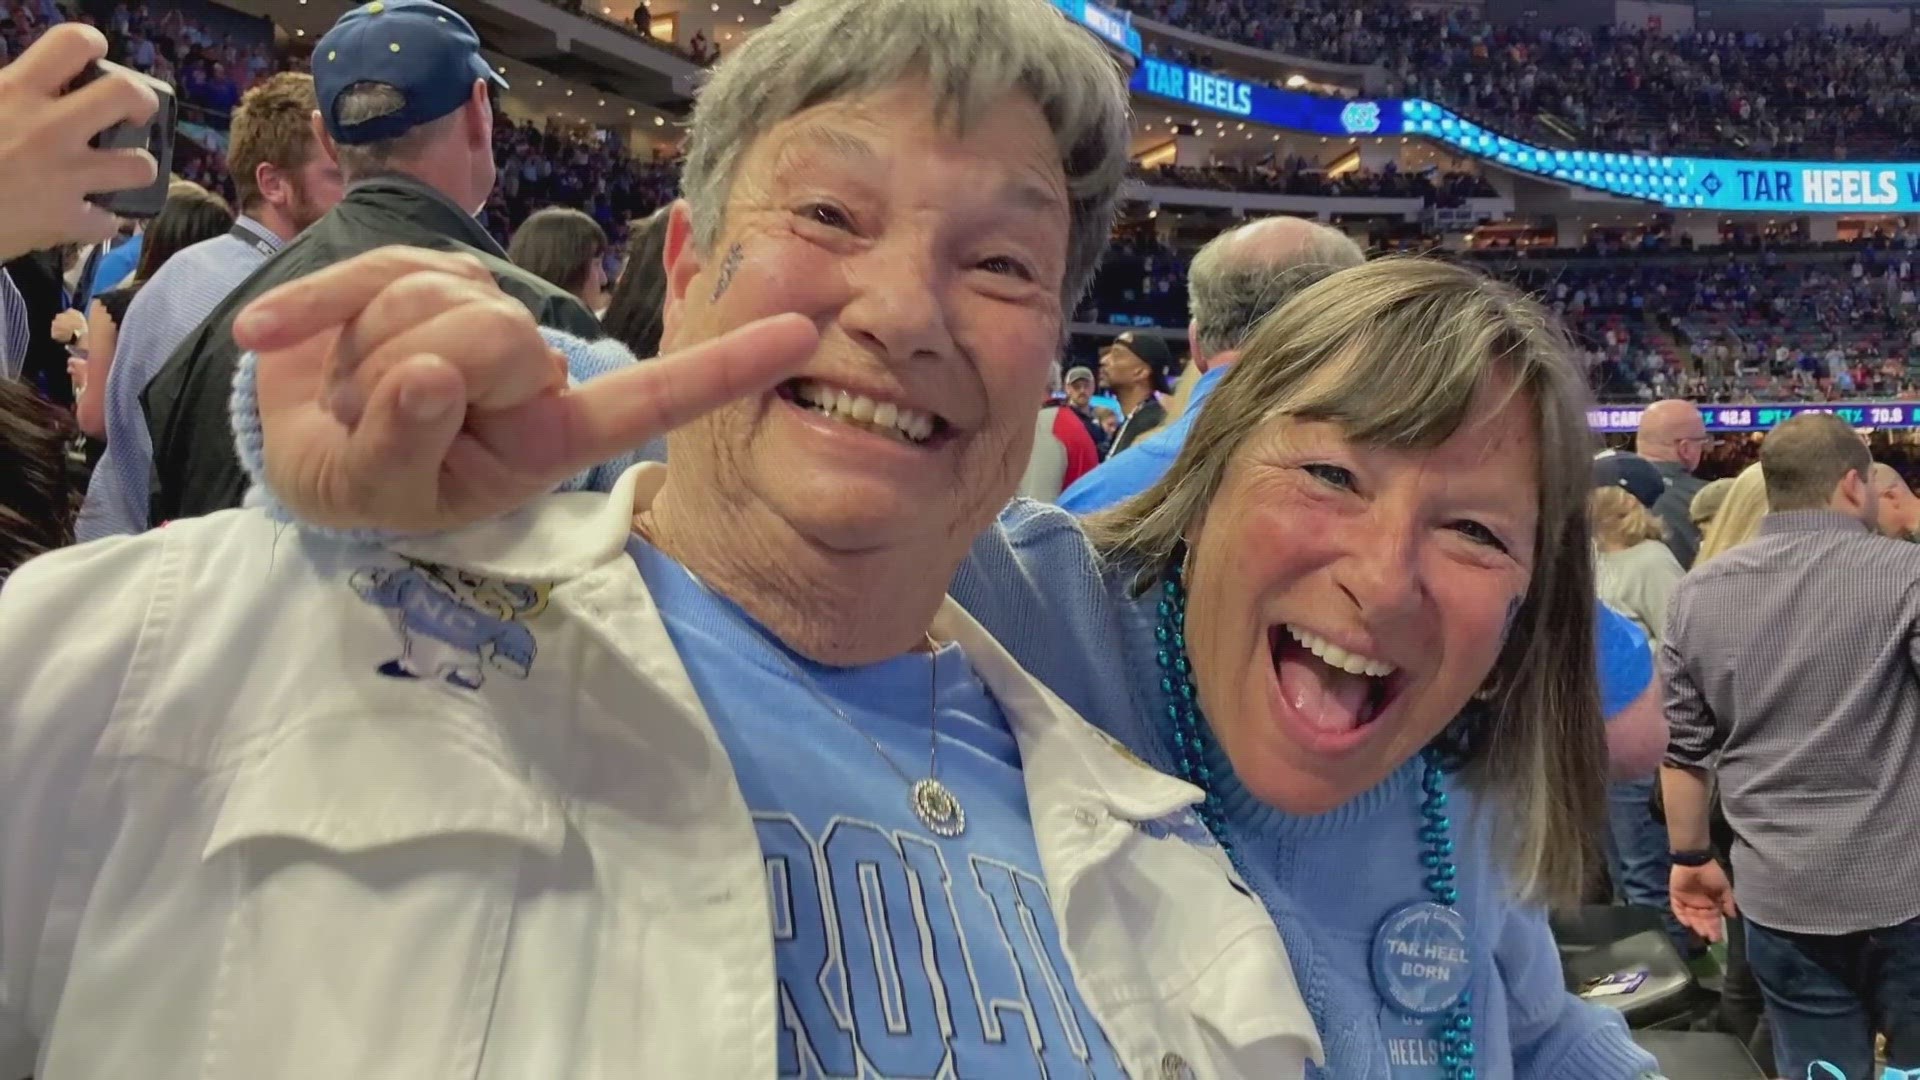 Jimi Harrison only had one question when she knew her Tar Heels were heading to LA for the Sweet Sixteen - "Who's coming with me?"